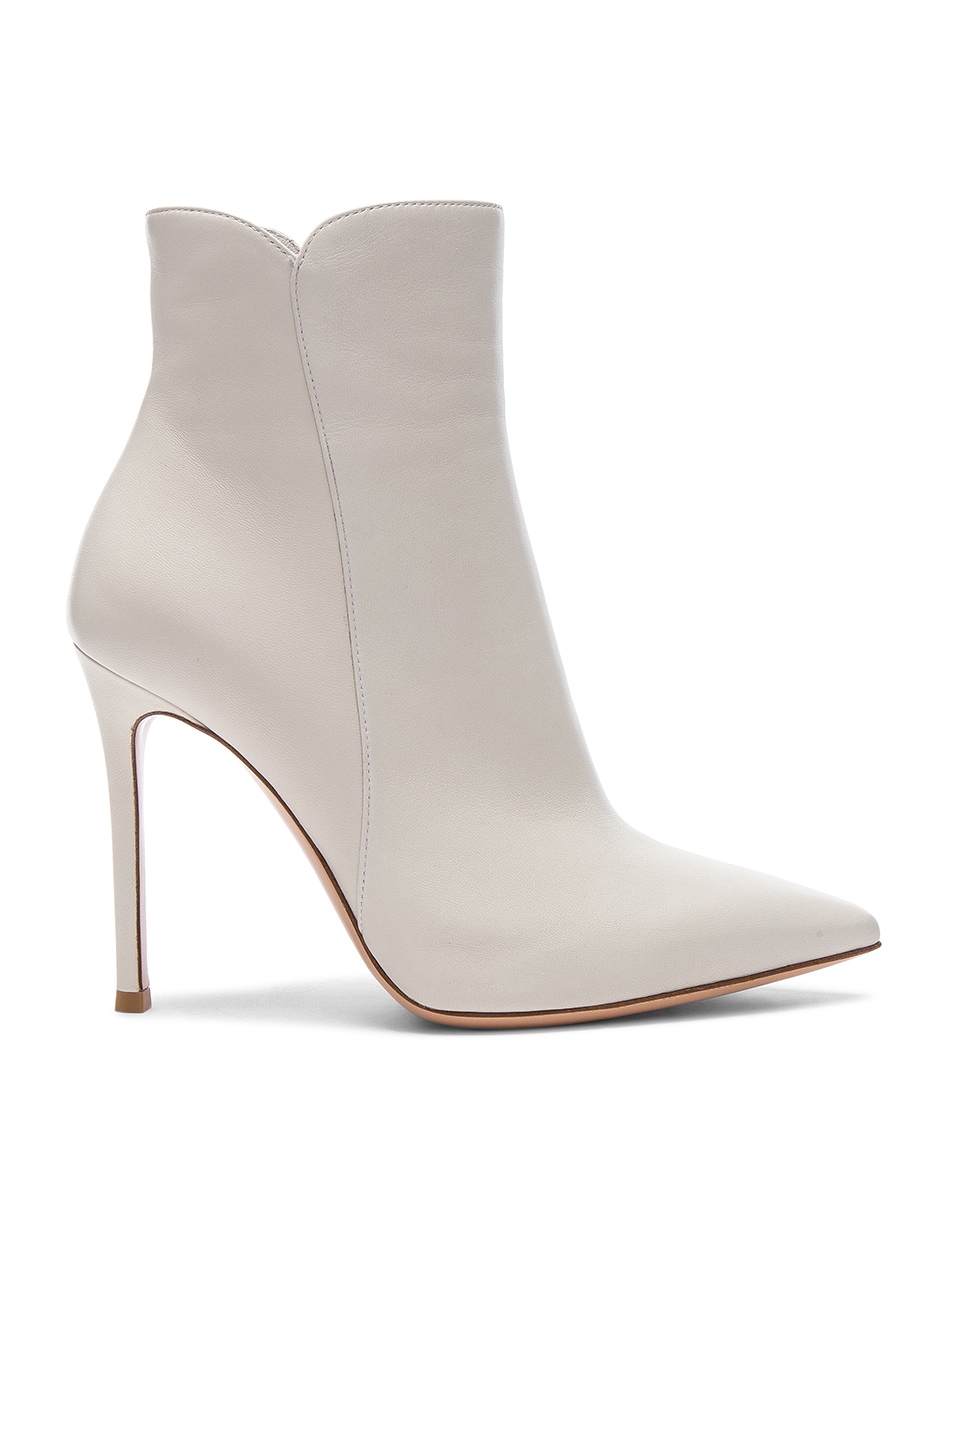 Image 1 of Gianvito Rossi Nappa Leather Levy Ankle Boots in Off White